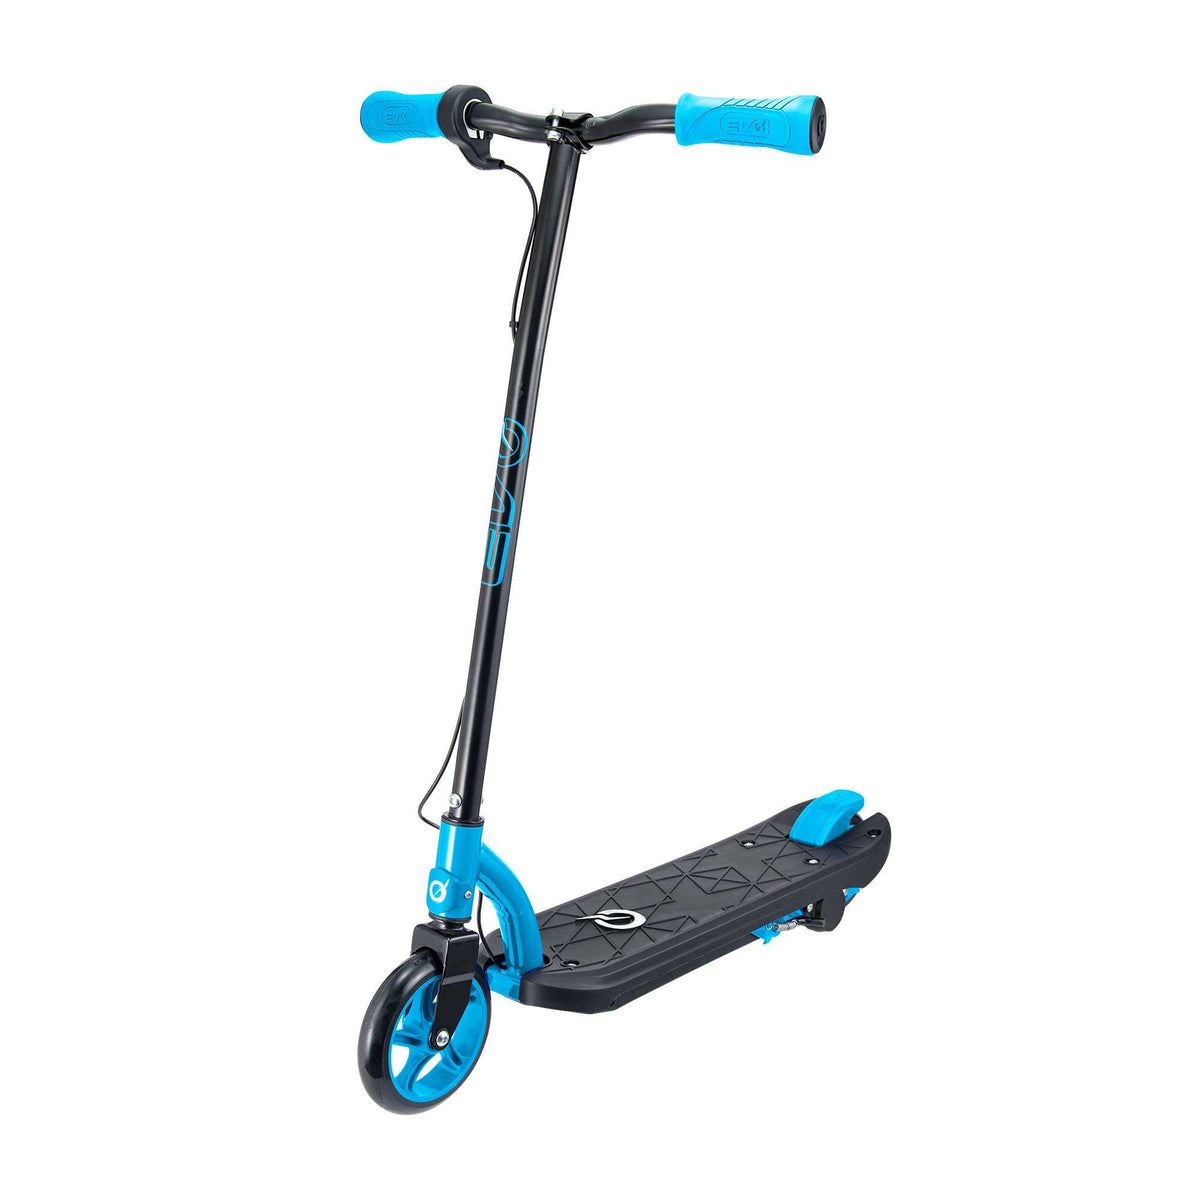 Childrens Electric Scooter, E-Scooter, Childrens Ride On, Electric Ride On, Rechargeable Scooter, Childrens Scooters